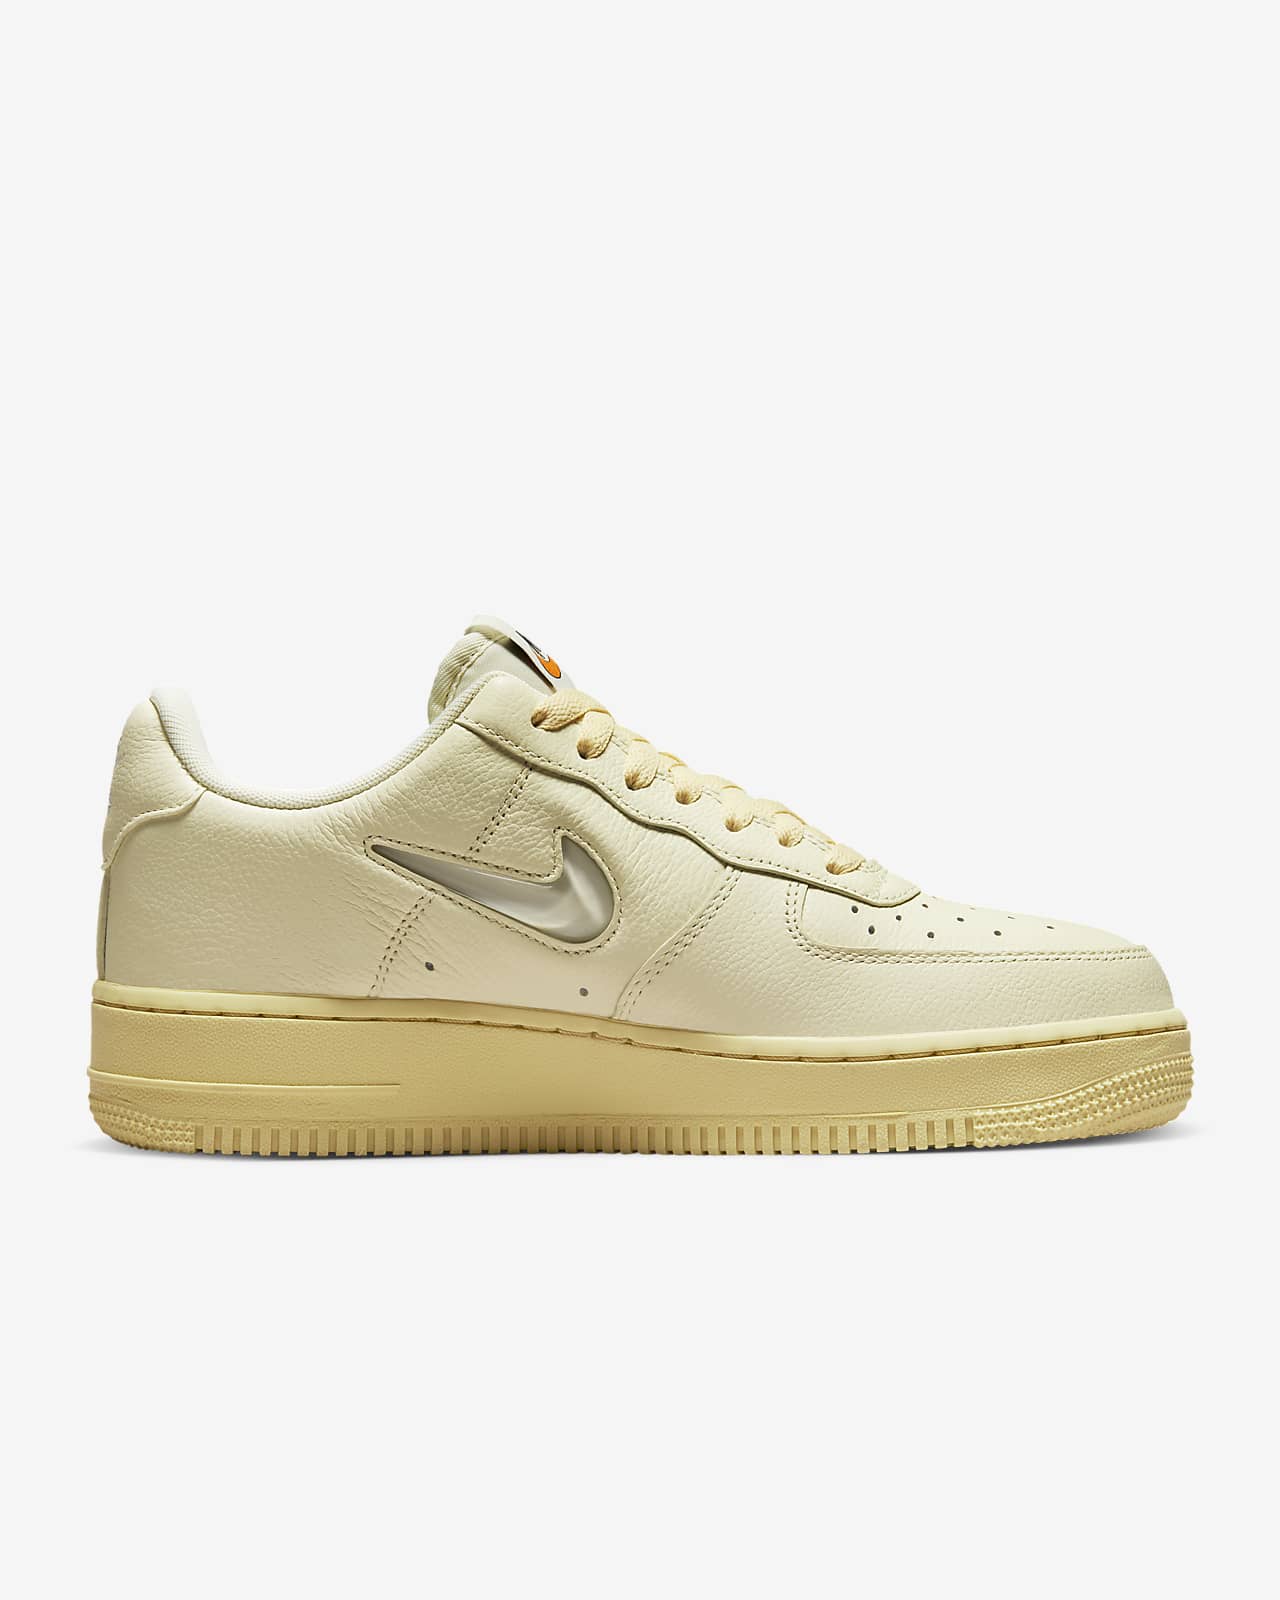 Nike Women's Air Force 1 LX Shoes